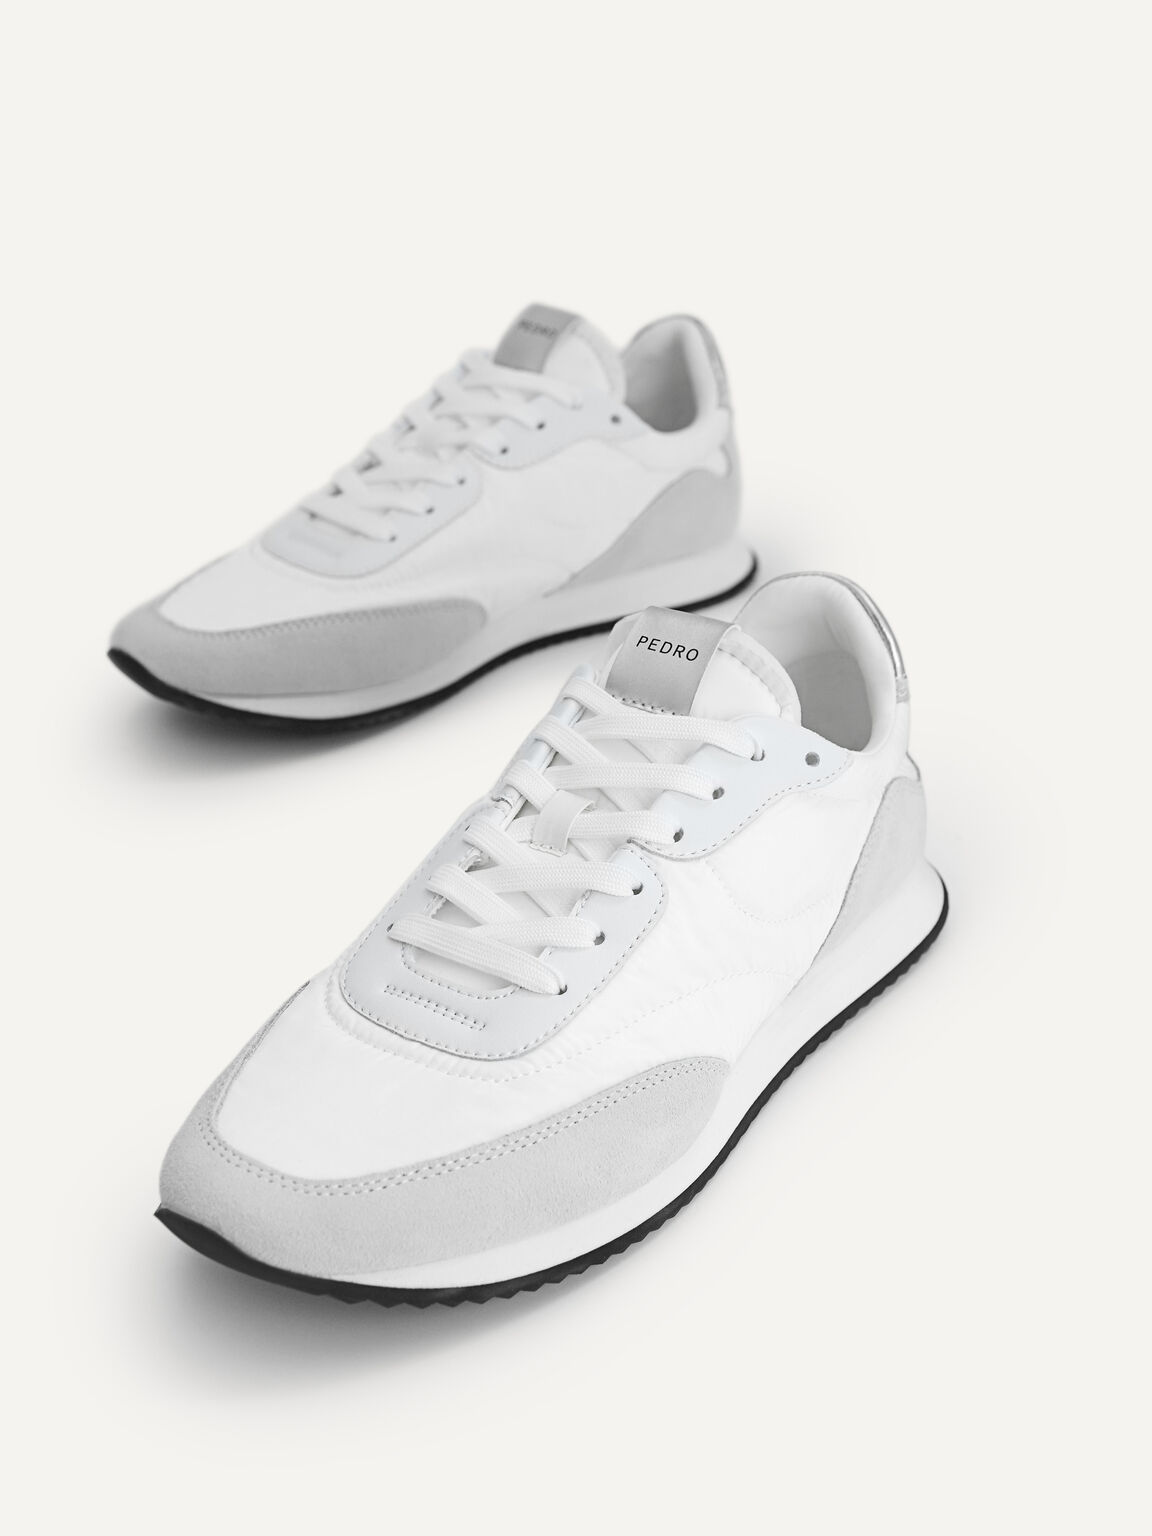 Nylon Leather Casual Sneakers, White